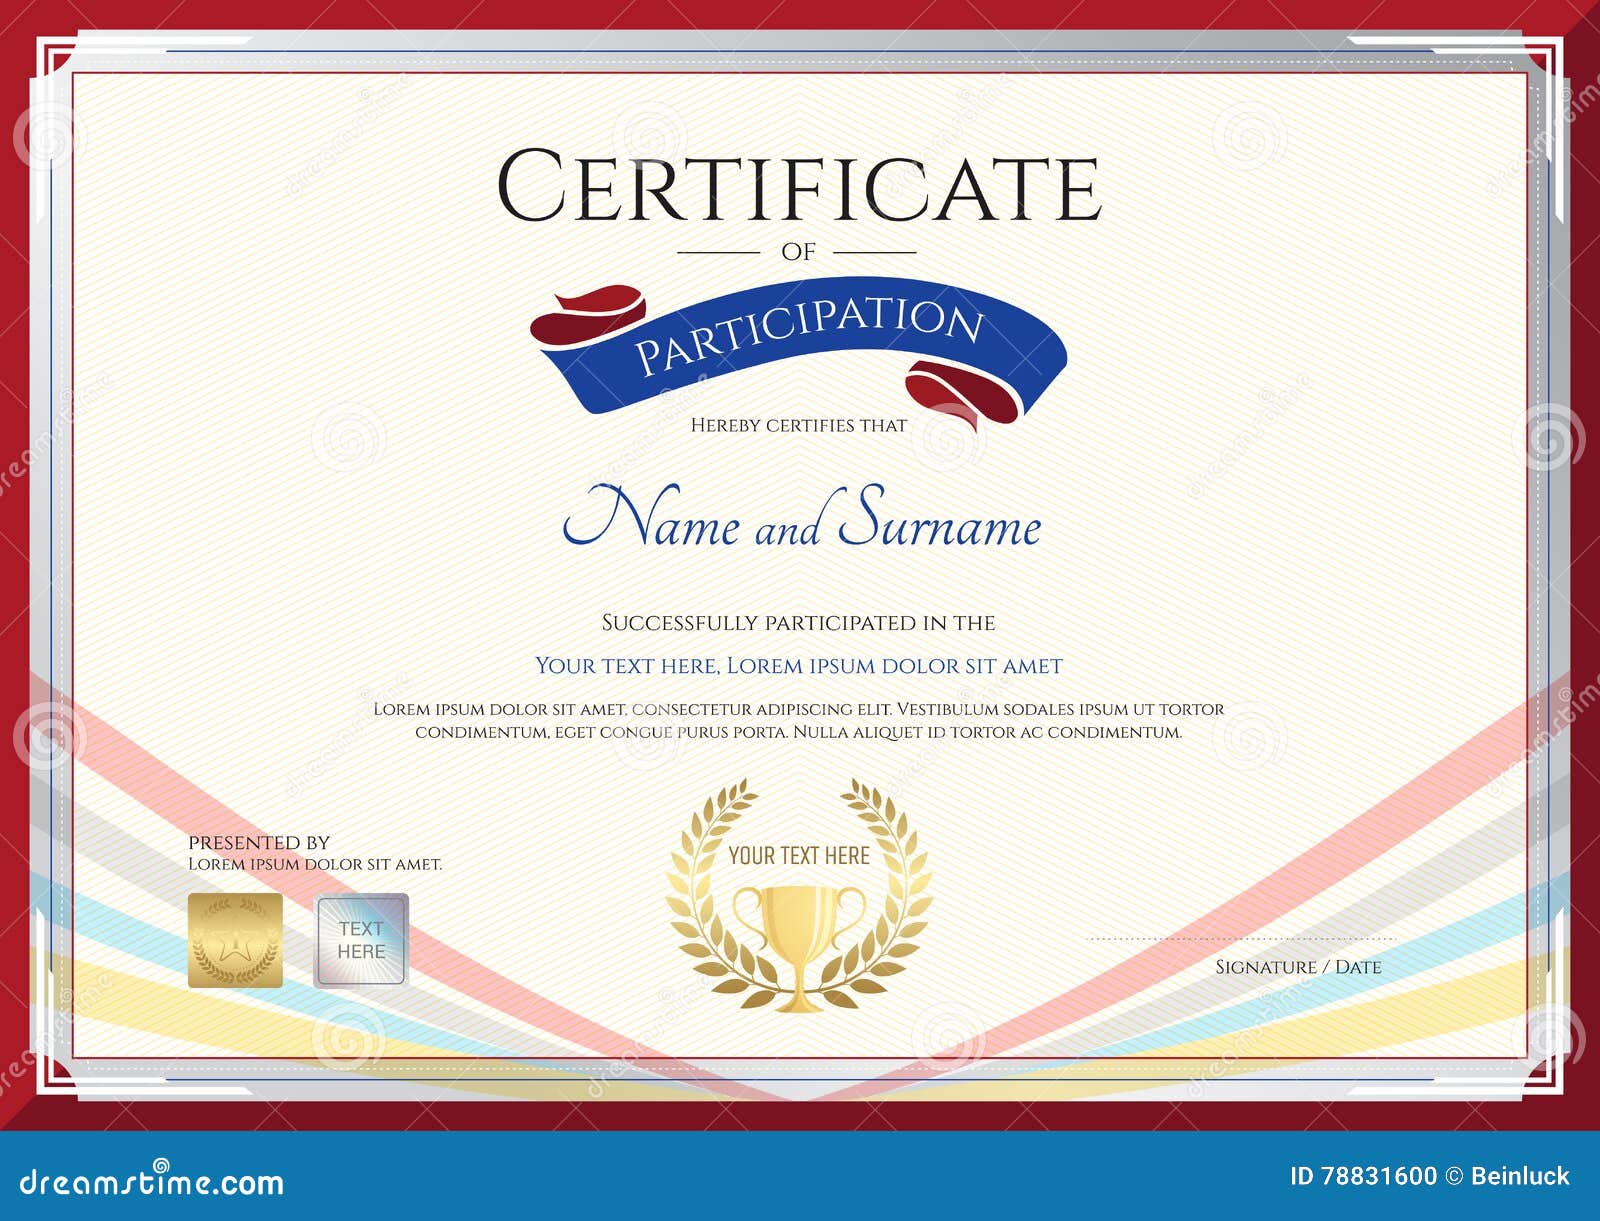 Certificate Participation Stock Illustrations – 22 Certificate Regarding Participation Certificate Templates Free Download